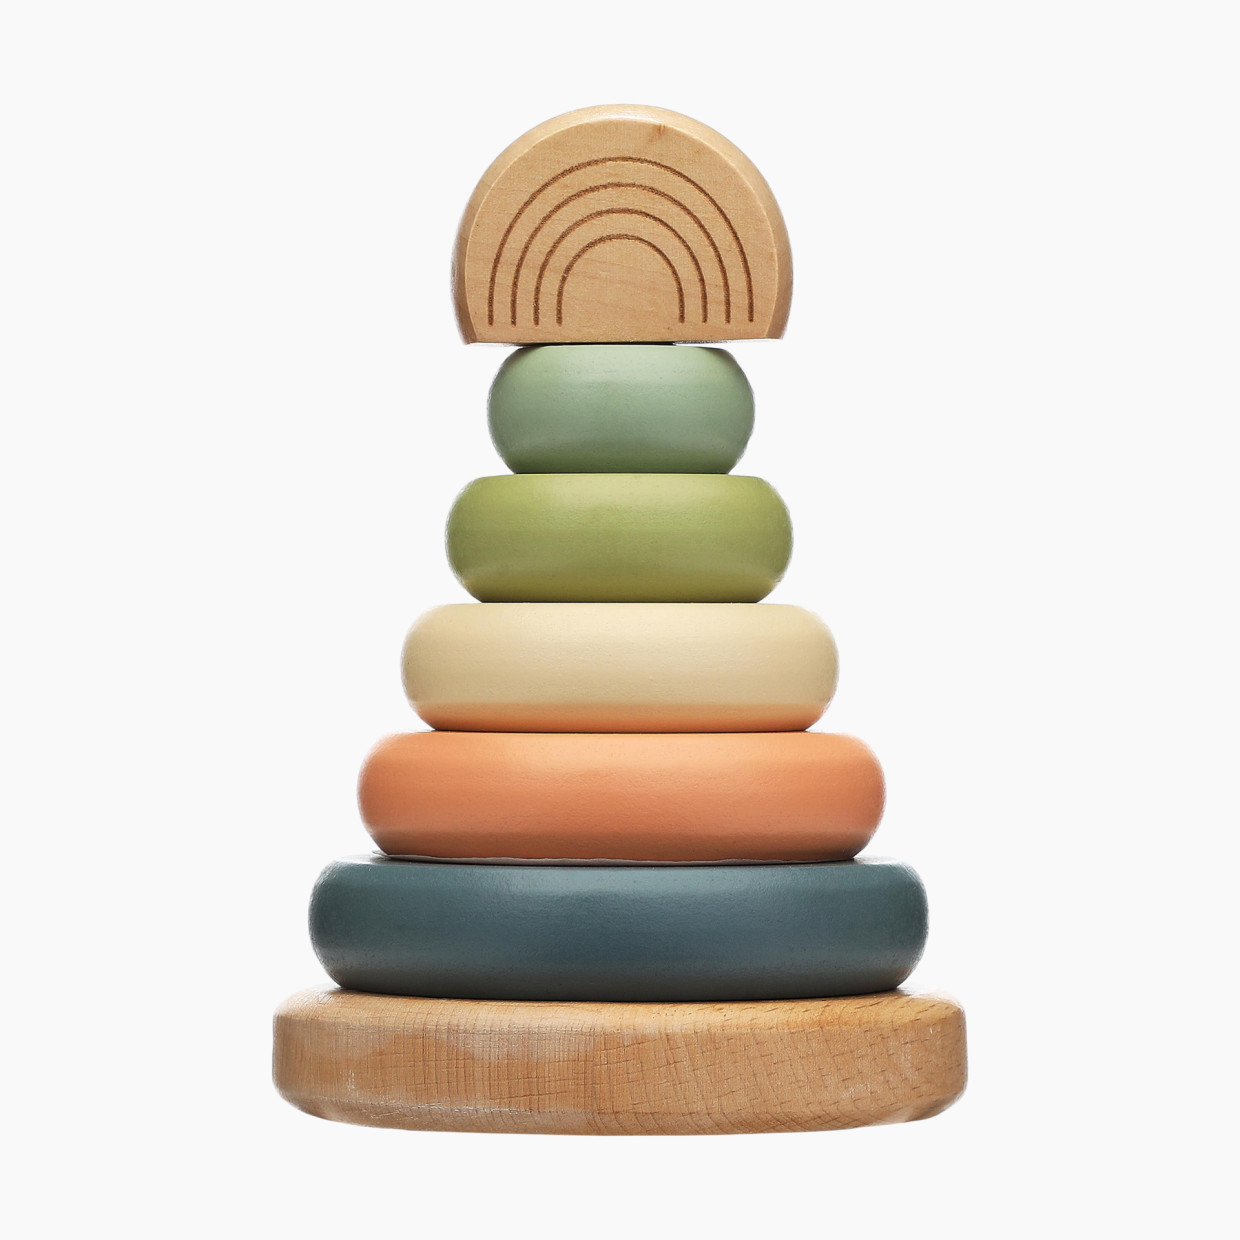 Pearhead Wooden Stacking Toy Tower.